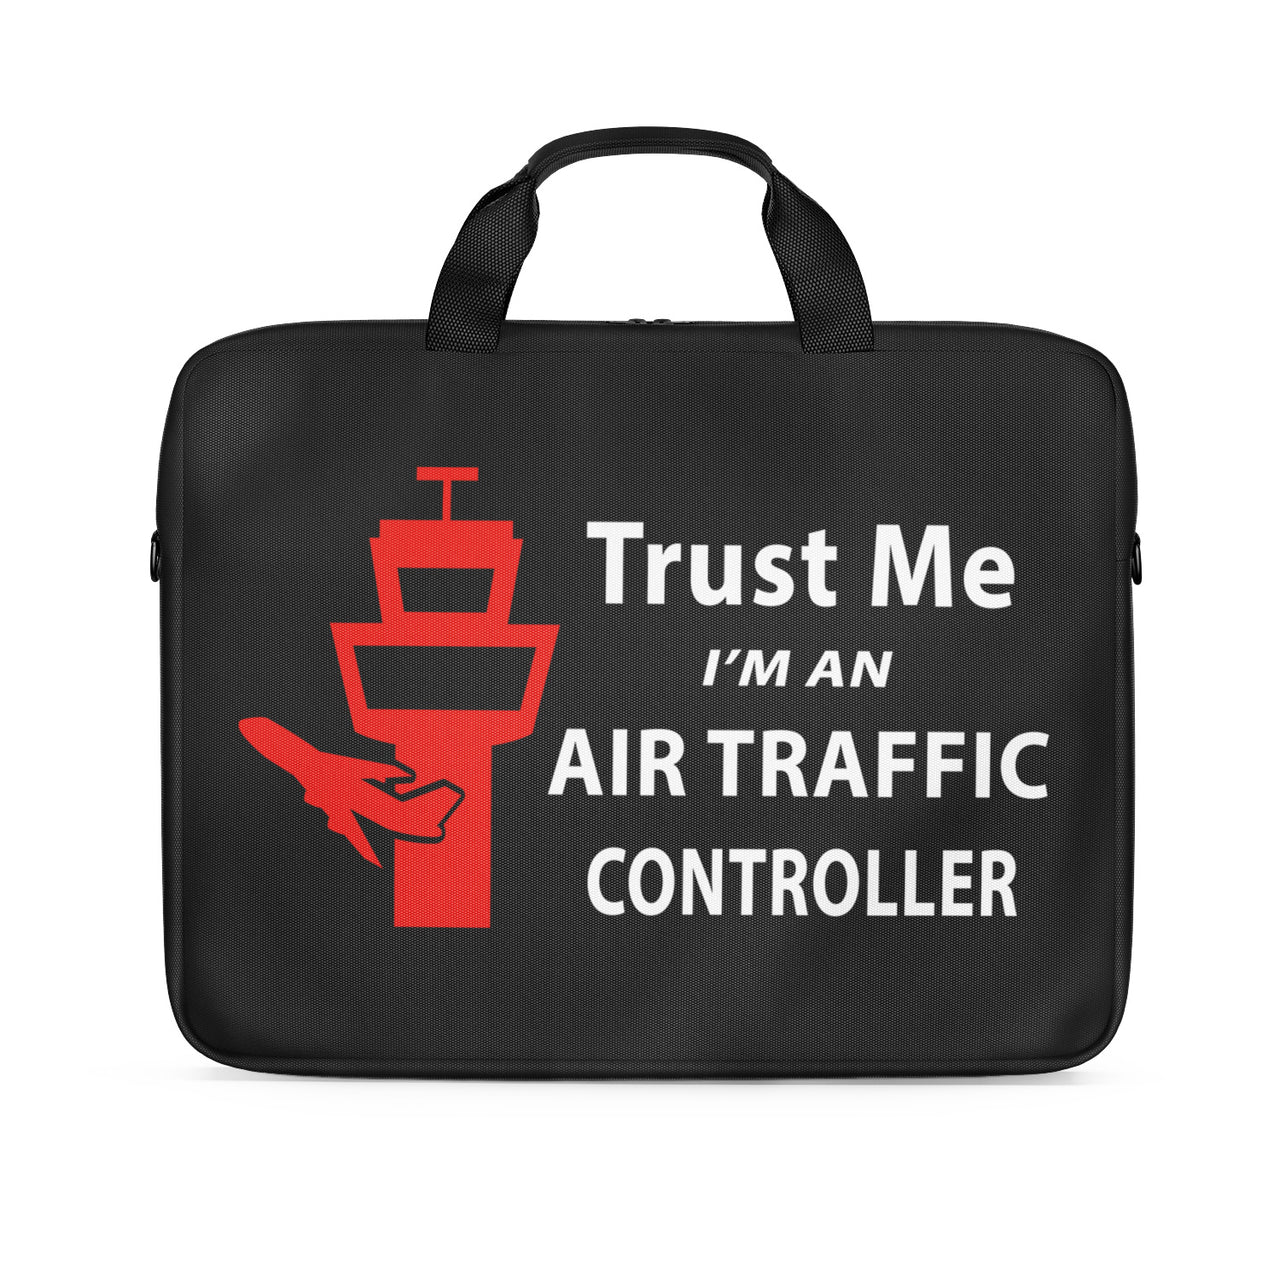 Trust Me I'm an Air Traffic Controller Designed Laptop & Tablet Bags